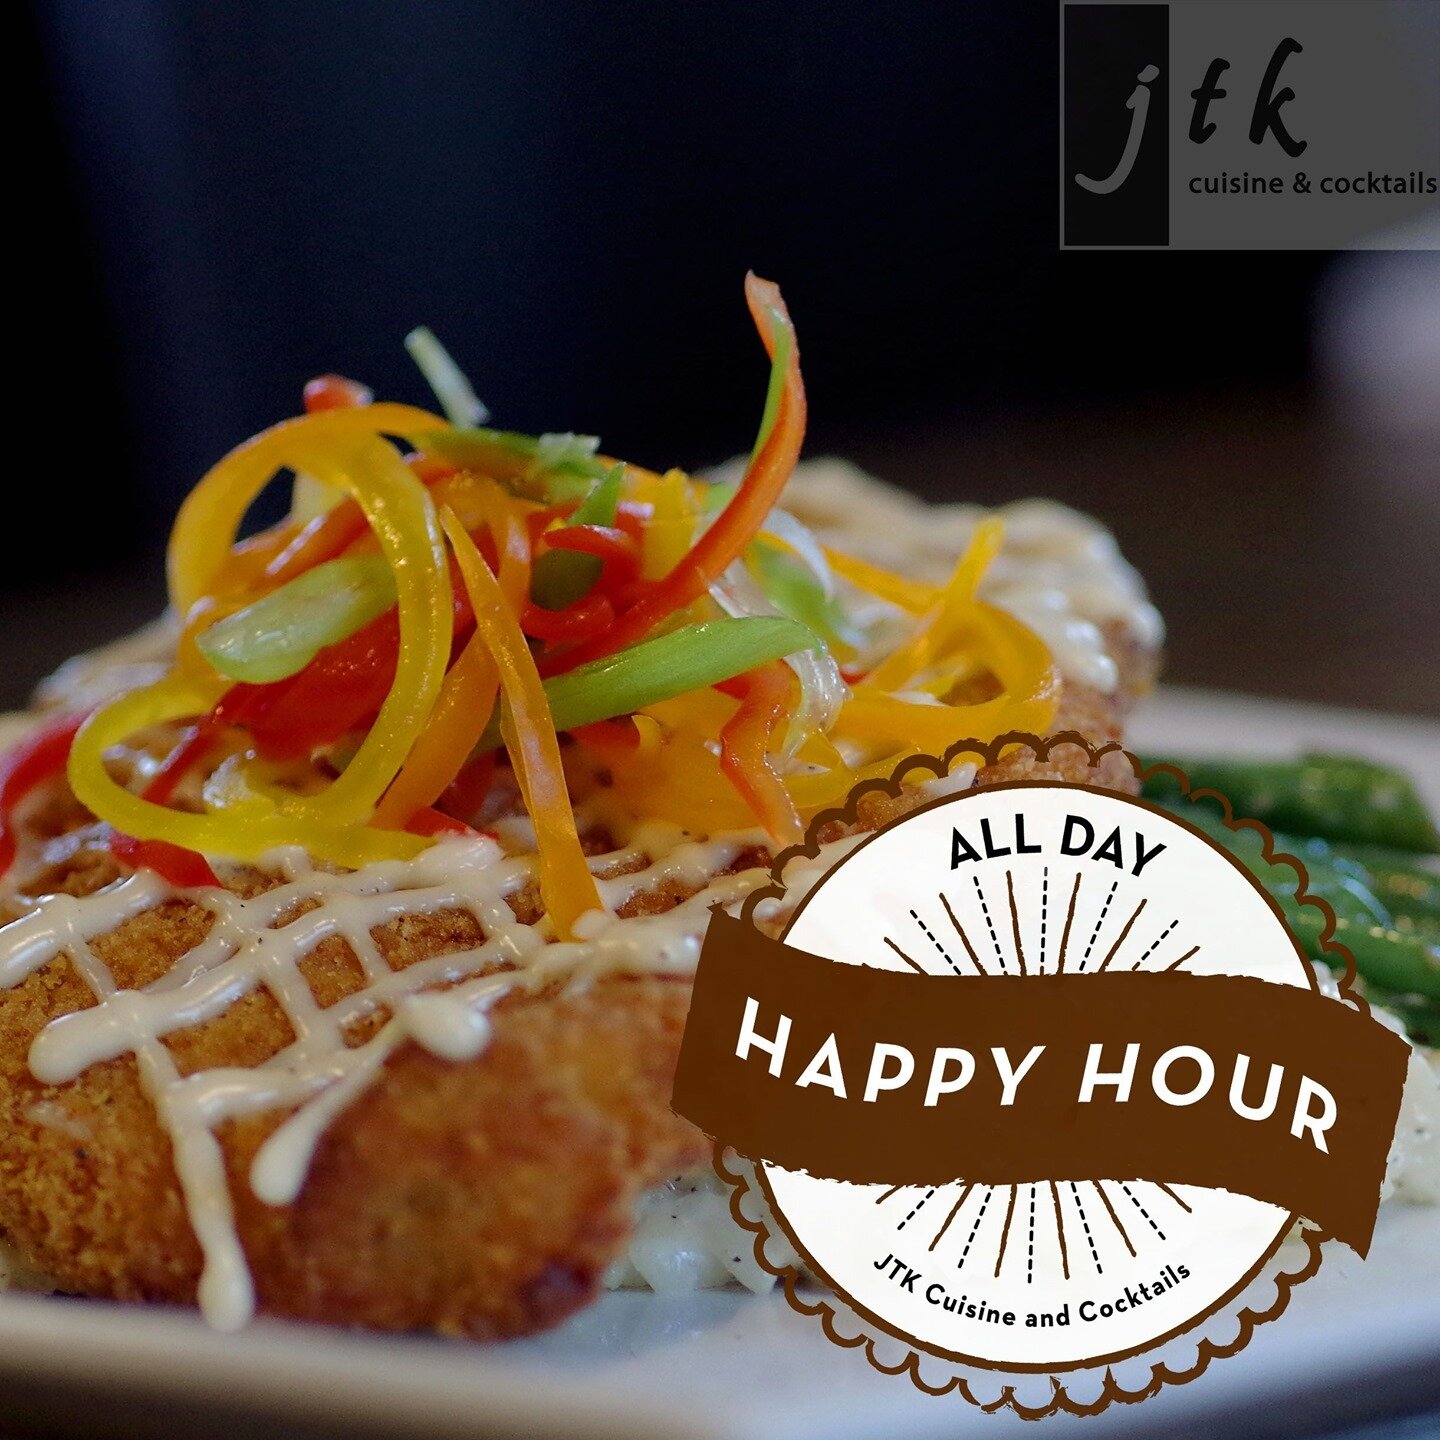 It might be gloomy outside but don't let that get you down when you know JTK has ALL DAY happy hour!!⠀
⠀
From open to close we have cocktail, beer, wine, whiskey, AND food specials! Make this your new hangout spot. Don't forget, our happy hour menu i